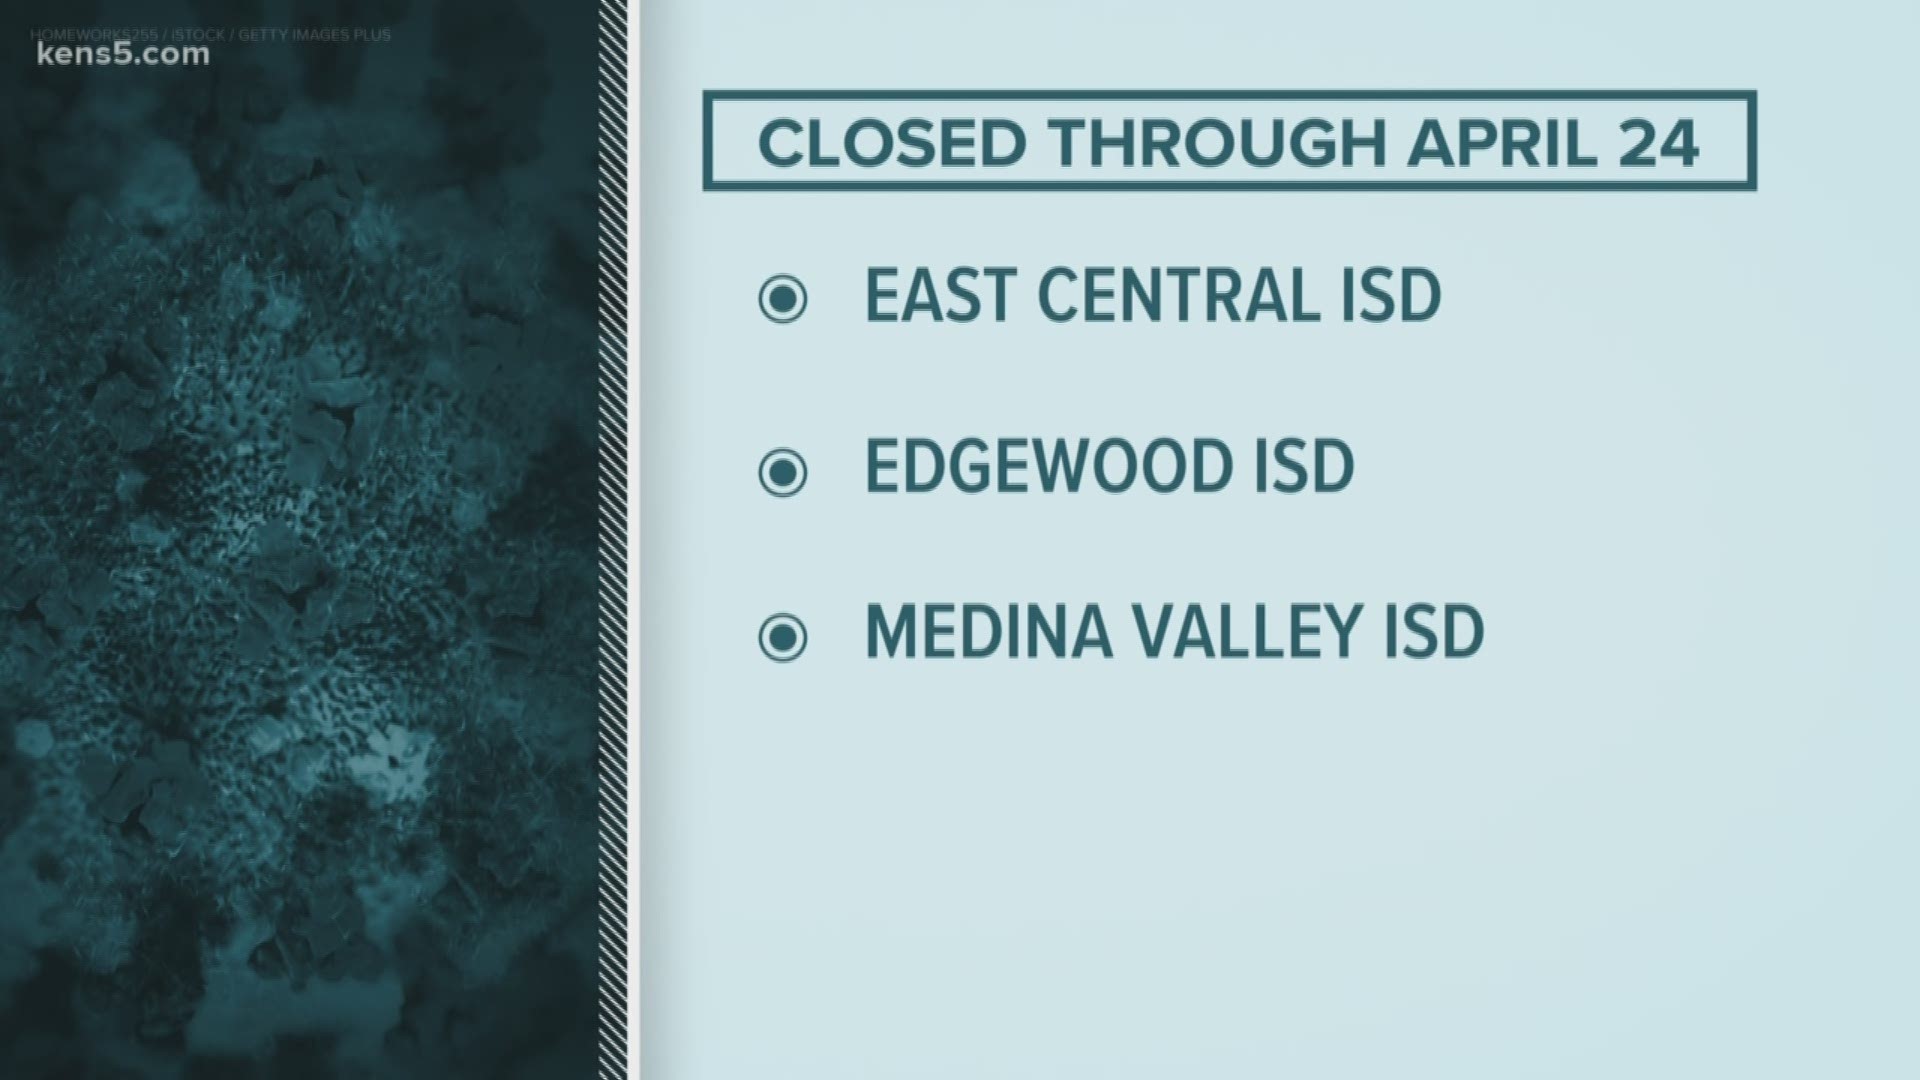 Several local districts are now keeping schools closed through at least April 24.